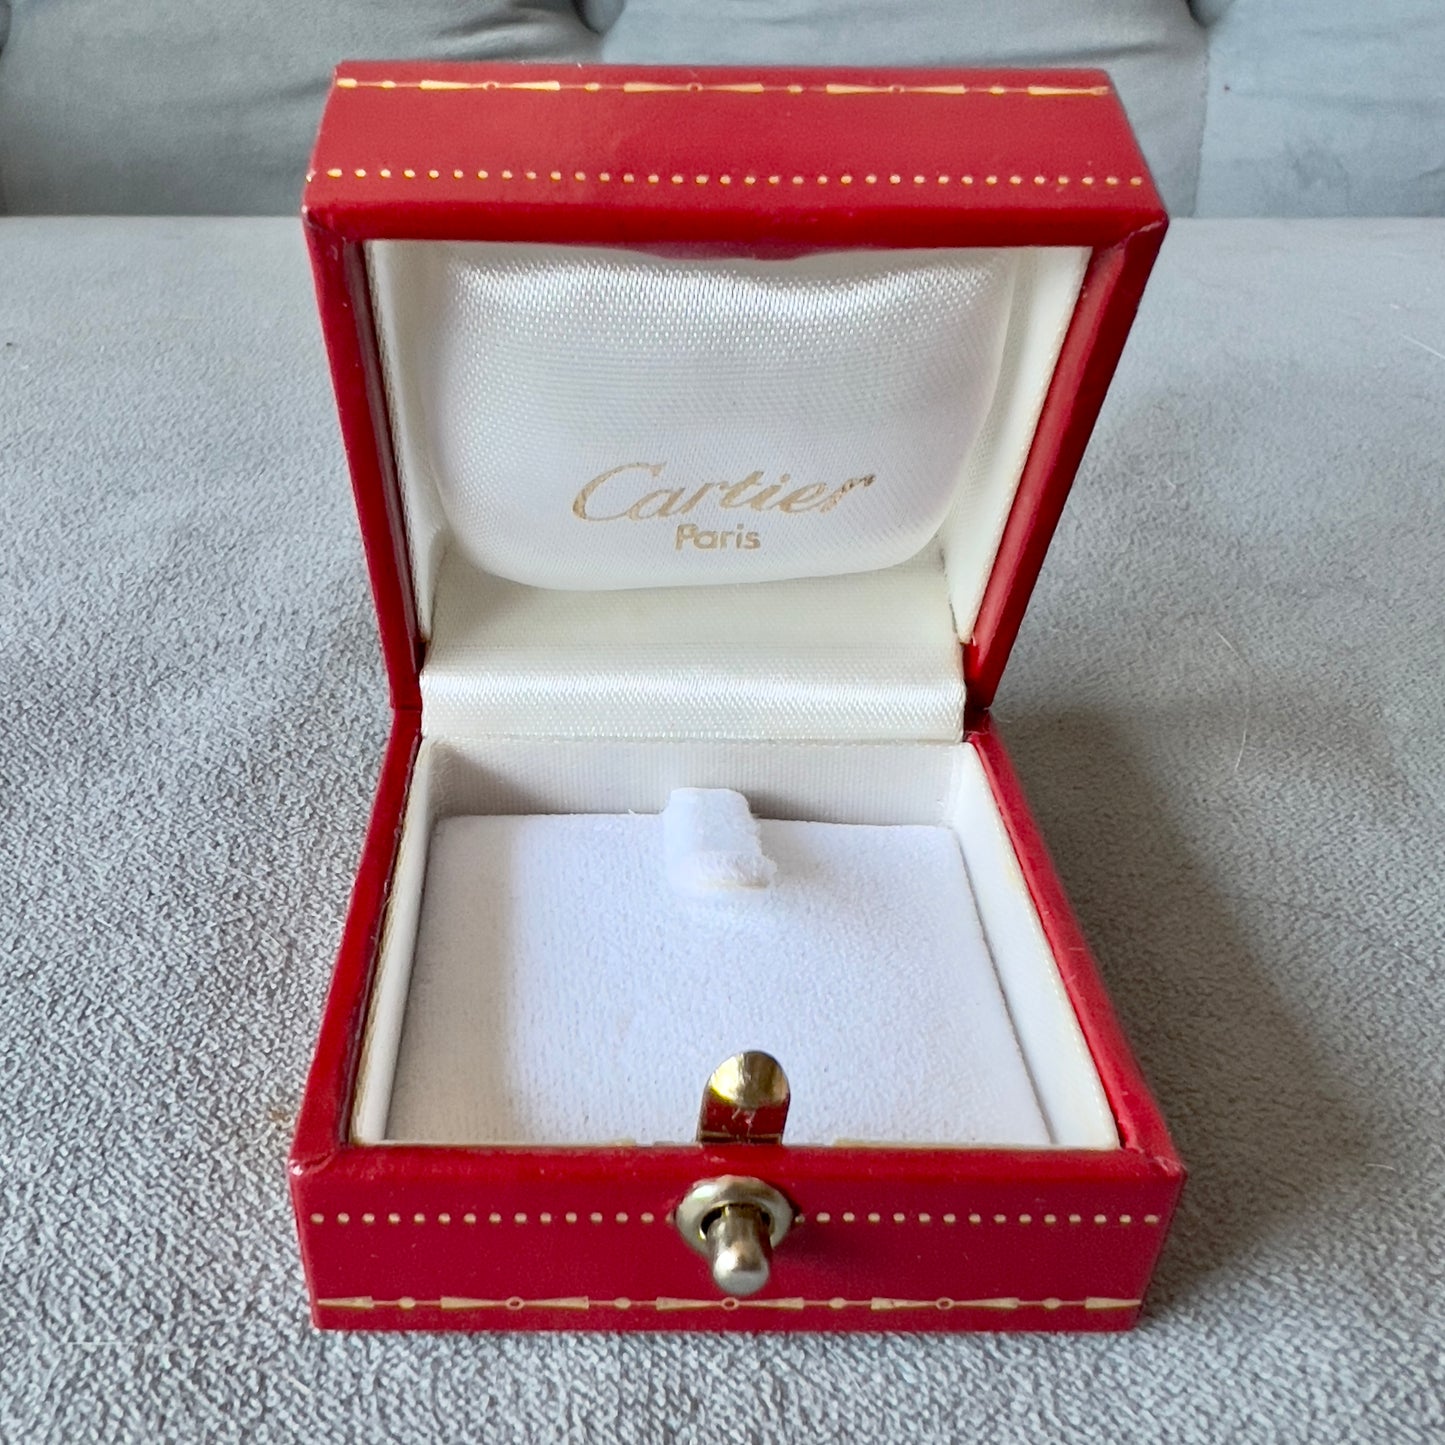 CARTIER Ring Box 2x2x1.10 inches